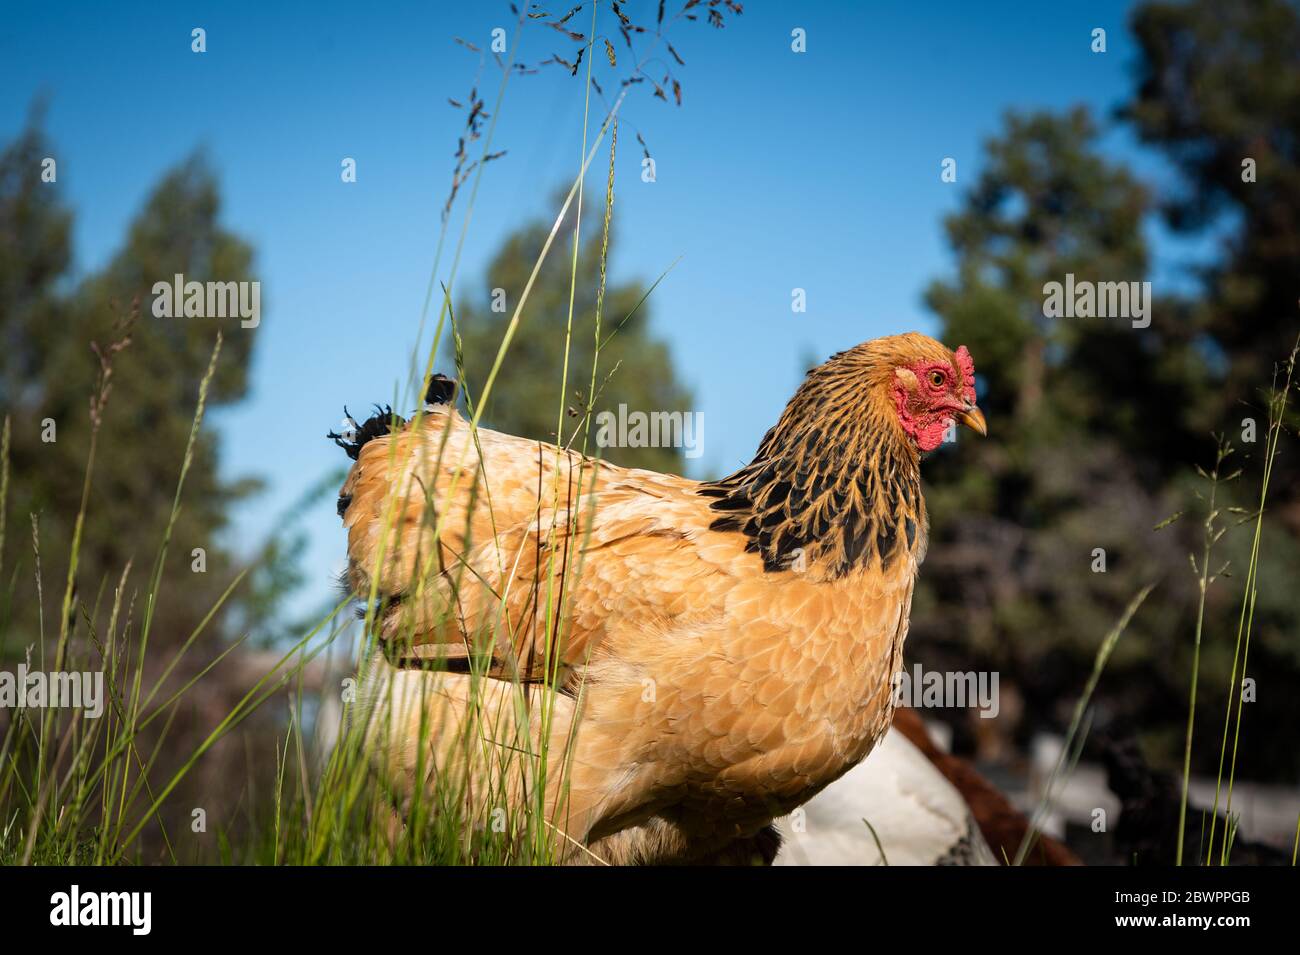 A close up of a single free range hen standing in tall grass with a blue sky background Stock Photo